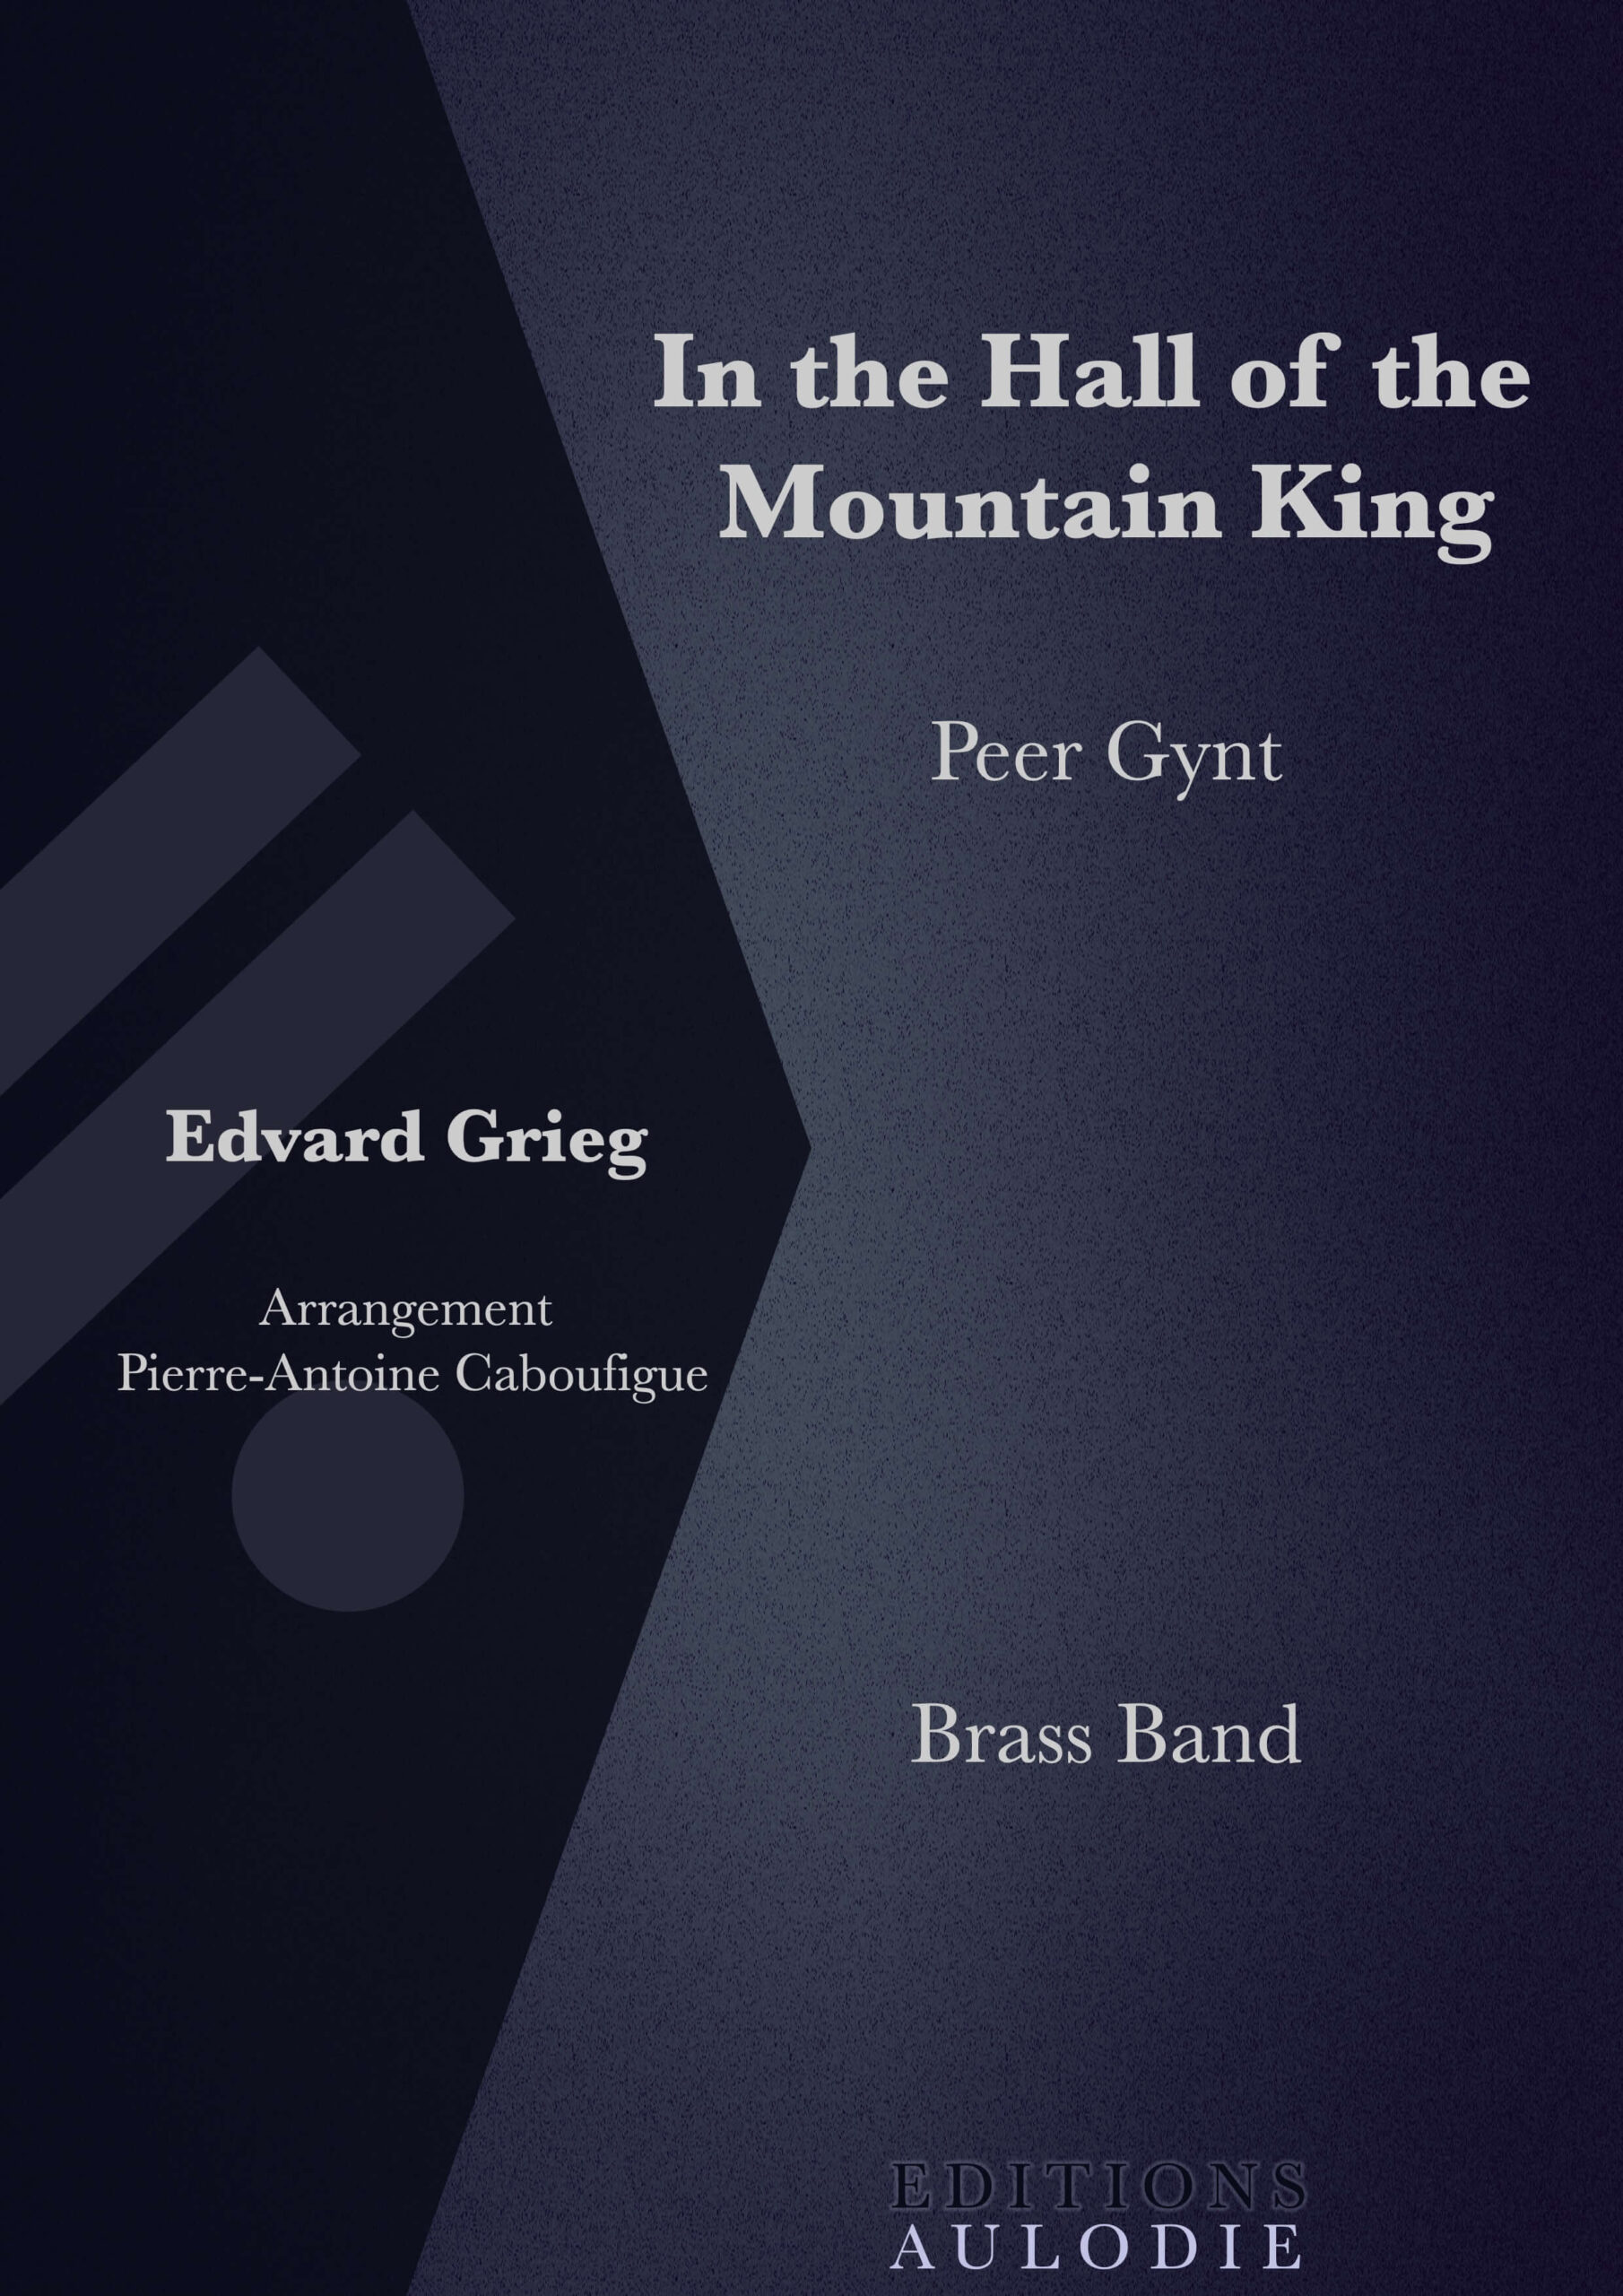 EA01035-In_the_Hall_of_the_Mountain_King-Peer_Gynt-Edvard_Grieg-Brass_Band